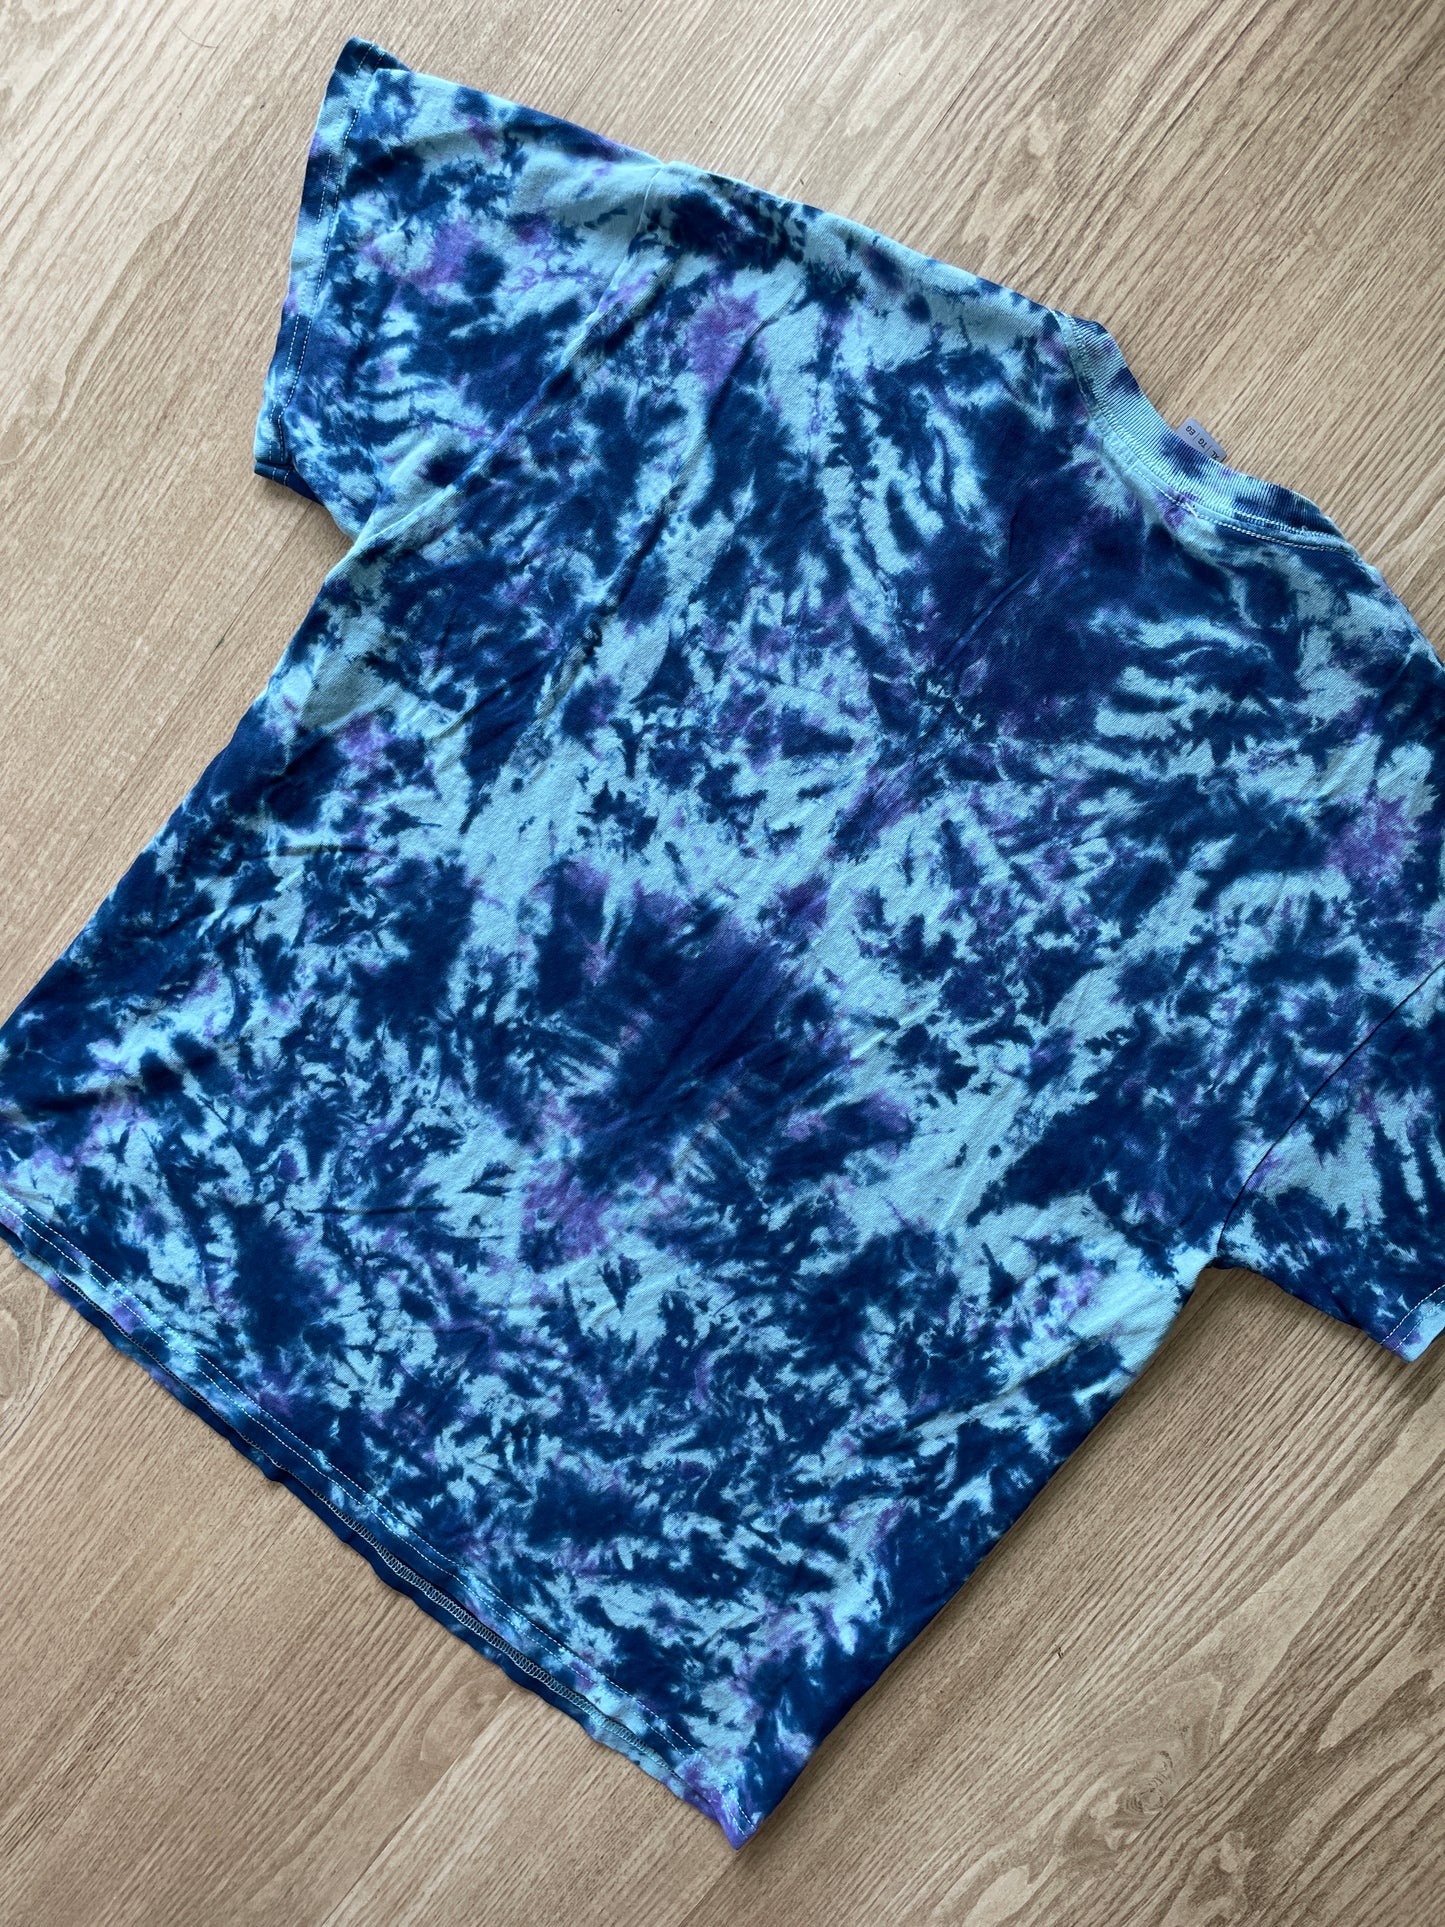 XL Men’s Climbing Shoe Tie Dye T-Shirt | One-Of-a-Kind Blue and Purple Crumpled Short Sleeve